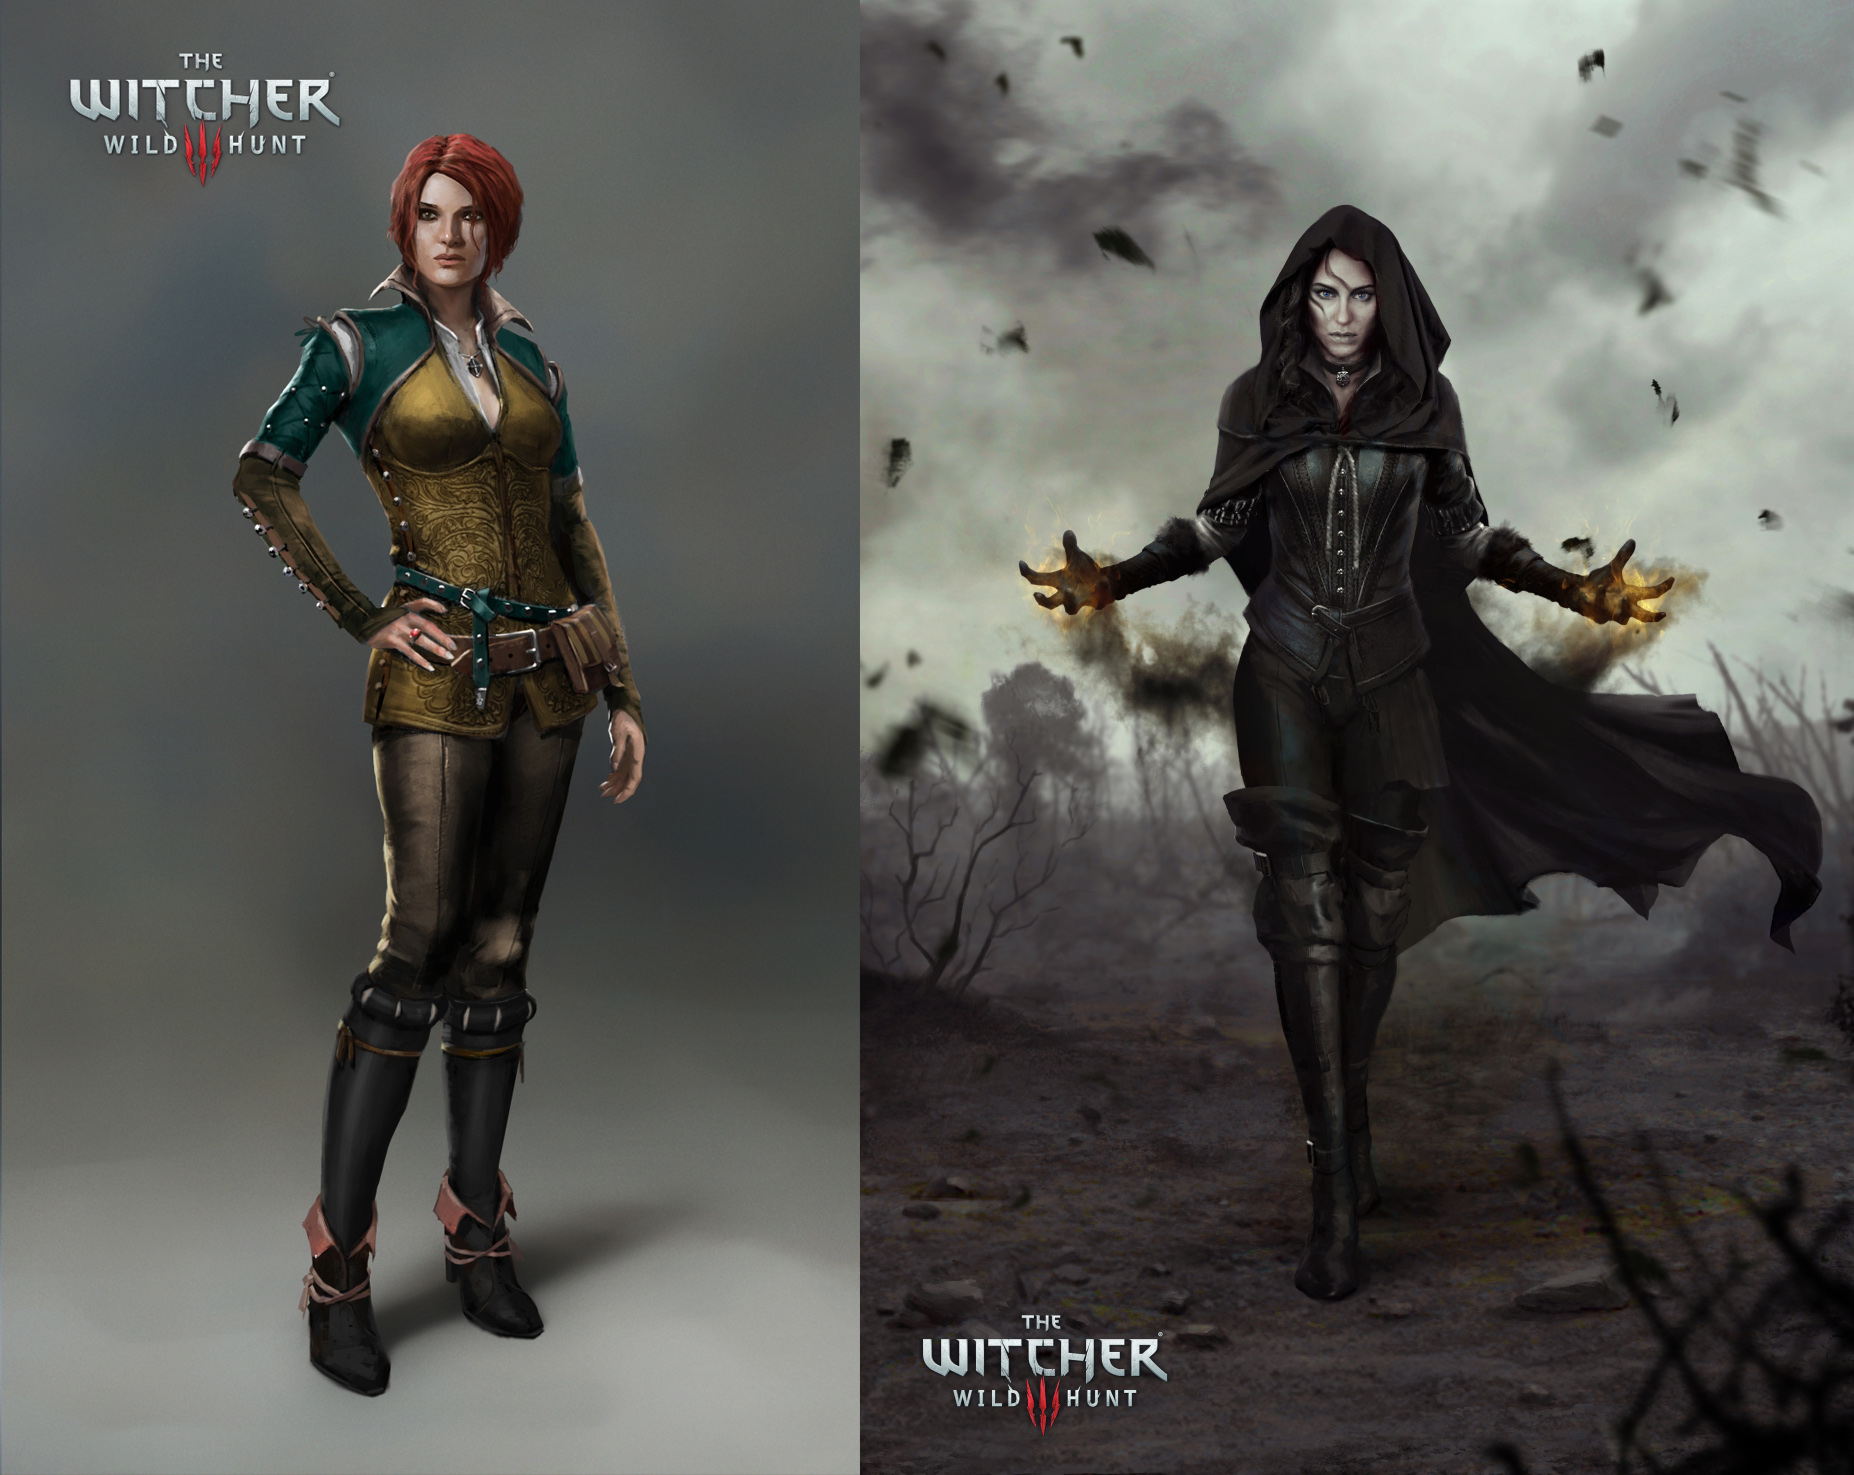 http://www.gamer.ru/system/attached_images/images/000/678/445/original/83447_iw2grxmtp3_the_witcher_3_wild_hunt_yennefer_triss.jpg